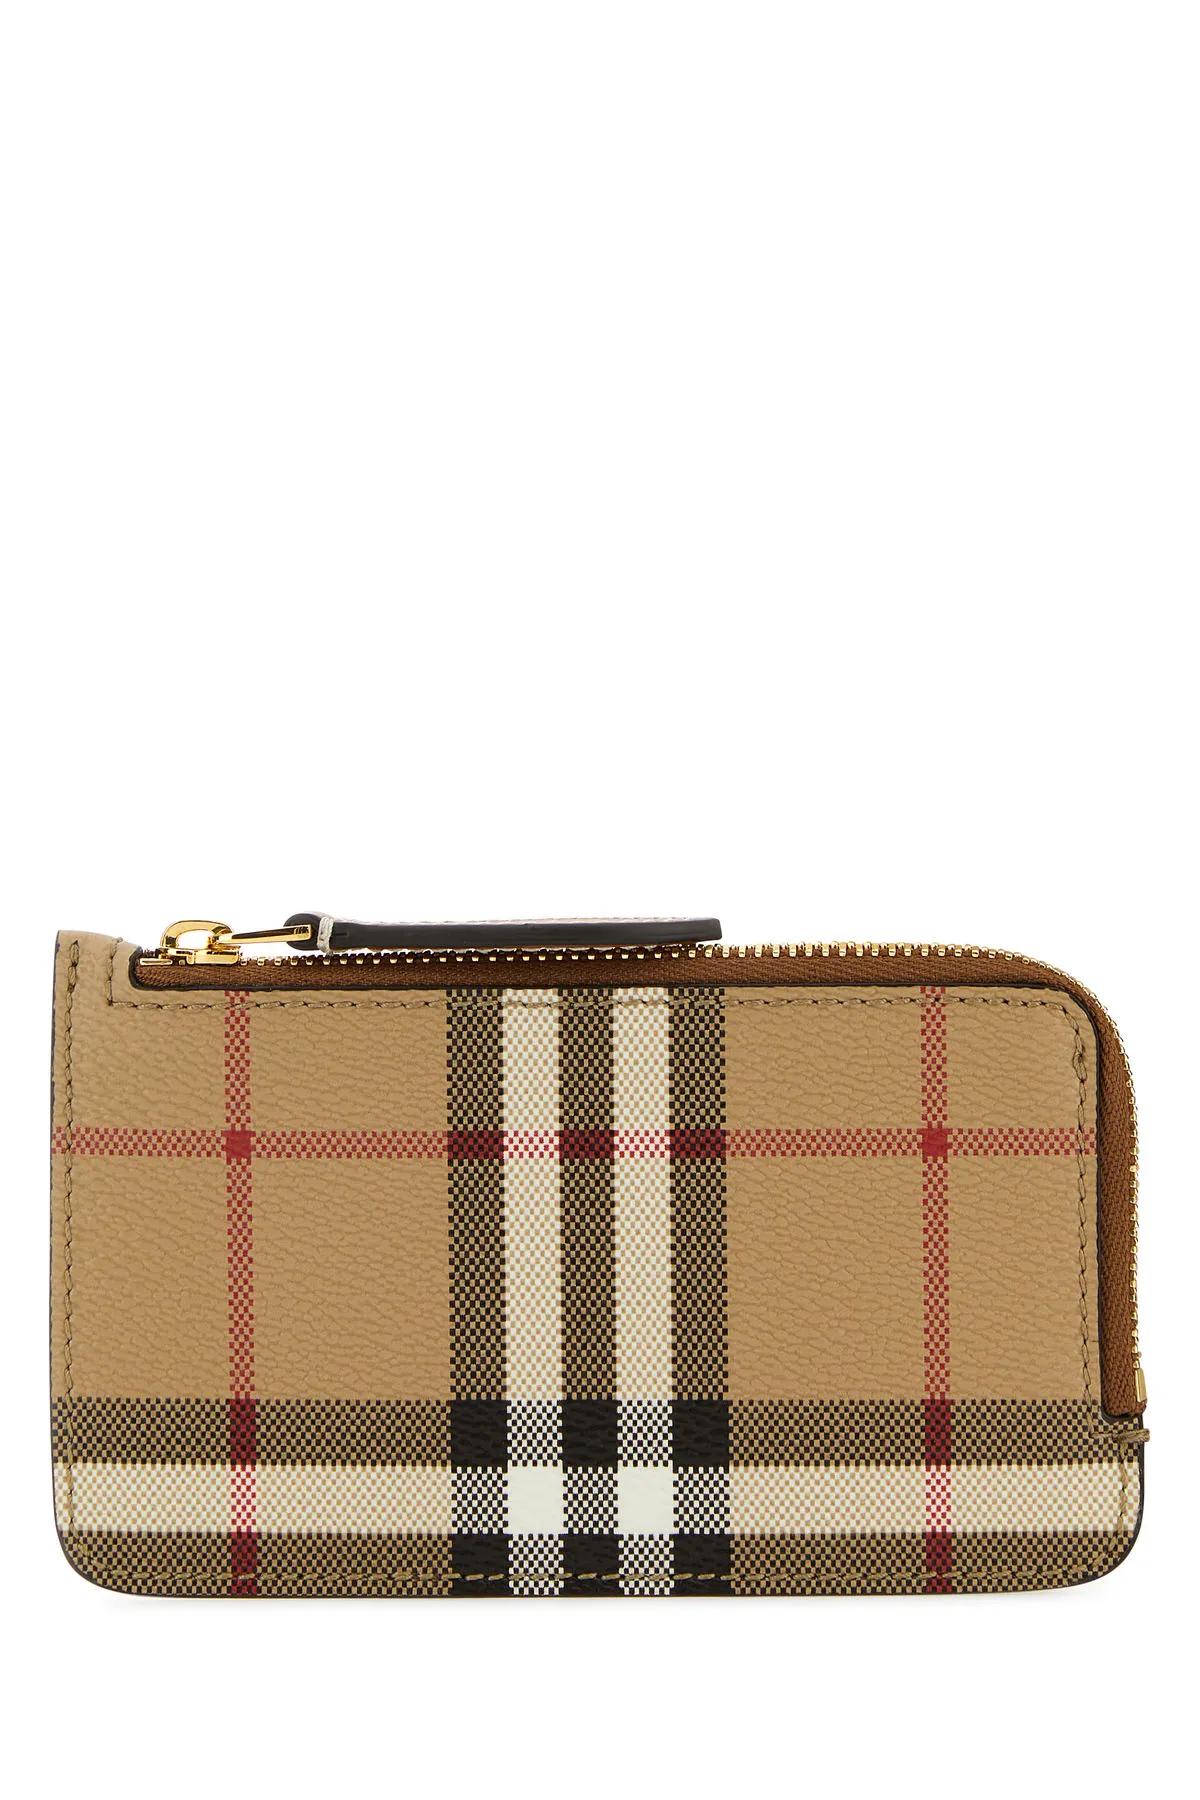 Burberry Printed Canvas Card Holder In Beige